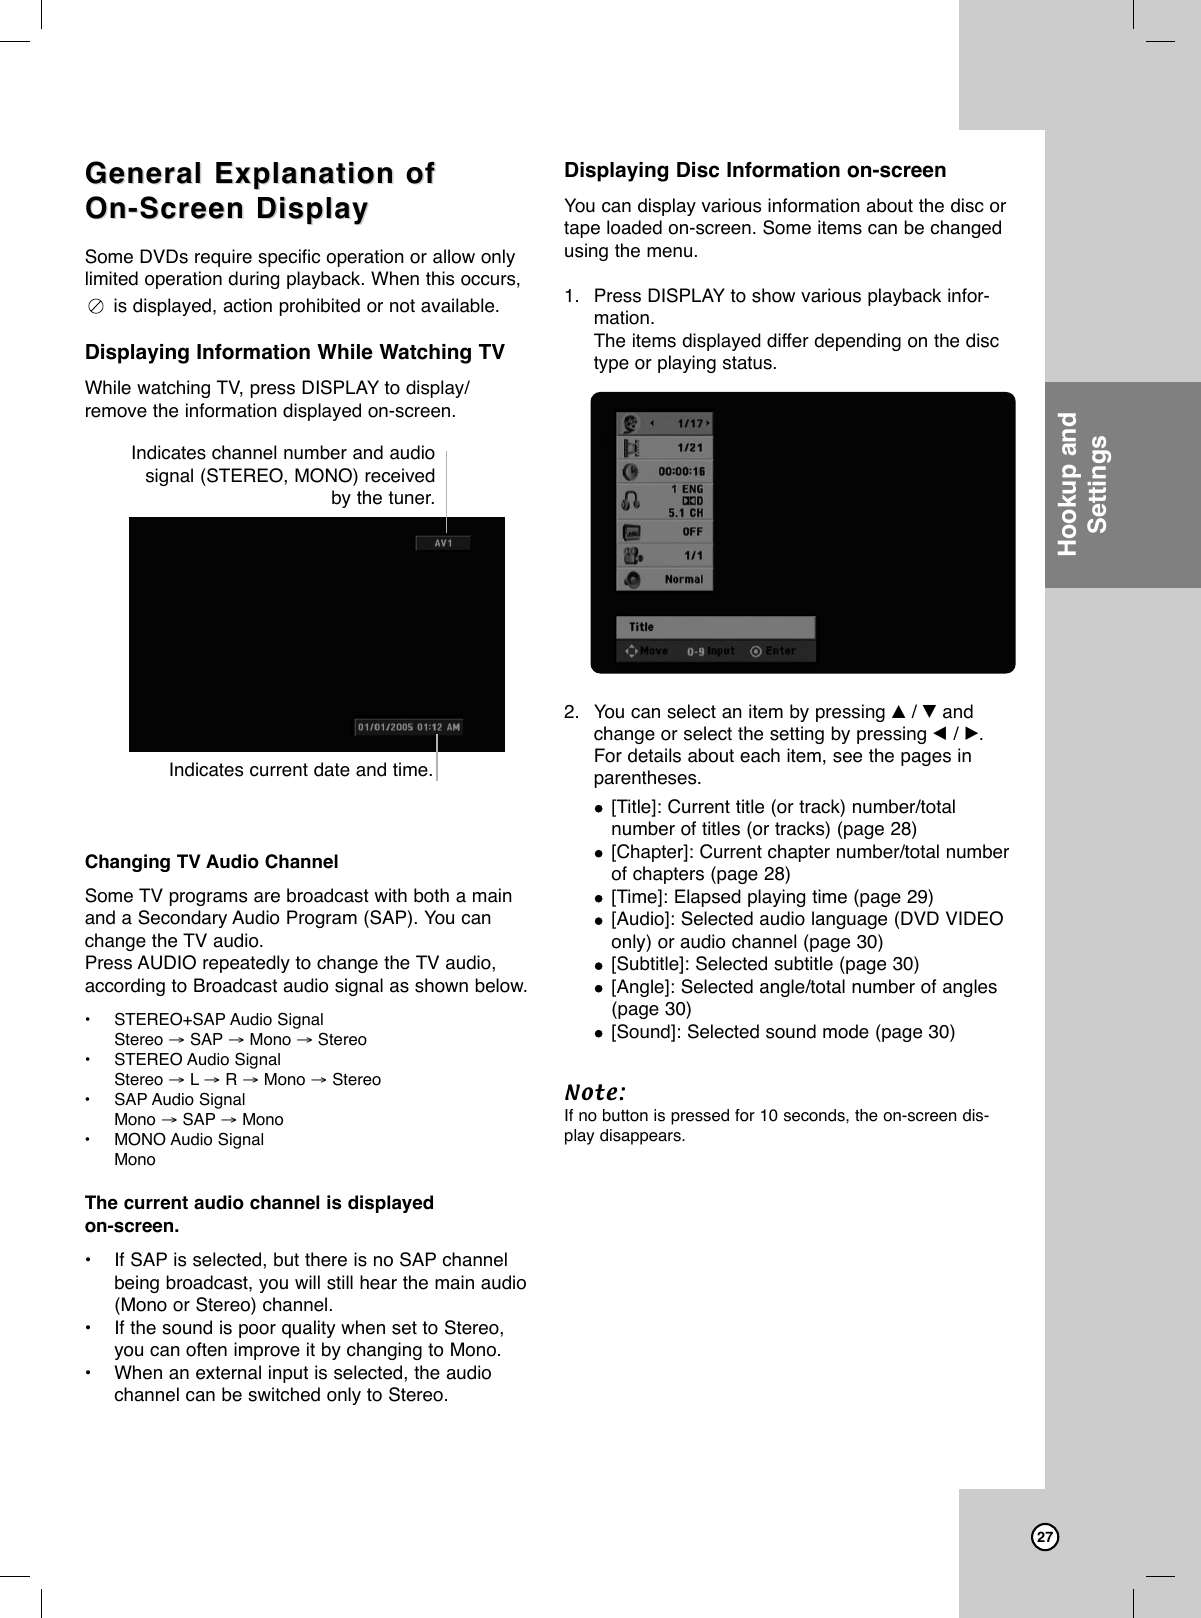 27General Explanation ofGeneral Explanation ofOn-Screen DisplayOn-Screen DisplaySome DVDs require specific operation or allow onlylimited operation during playback. When this occurs,is displayed, action prohibited or not available.Displaying Information While Watching TVWhile watching TV, press DISPLAY to display/remove the information displayed on-screen.Changing TV Audio ChannelSome TV programs are broadcast with both a mainand a Secondary Audio Program (SAP). You canchange the TV audio.Press AUDIO repeatedly to change the TV audio,according to Broadcast audio signal as shown below. •STEREO+SAP Audio Signal Stereo →SAP →Mono →Stereo•STEREO Audio Signal Stereo →L→R →Mono →Stereo•SAP Audio Signal Mono →SAP →Mono•MONO Audio Signal MonoThe current audio channel is displayed on-screen.•If SAP is selected, but there is no SAP channelbeing broadcast, you will still hear the main audio(Mono or Stereo) channel.•If the sound is poor quality when set to Stereo,you can often improve it by changing to Mono.•When an external input is selected, the audiochannel can be switched only to Stereo.Displaying Disc Information on-screenYou can display various information about the disc ortape loaded on-screen. Some items can be changedusing the menu.1. Press DISPLAY to show various playback infor-mation.The items displayed differ depending on the disctype or playing status. 2. You can select an item by pressing v/ Vandchange or select the setting by pressing b/ B.For details about each item, see the pages inparentheses.[Title]: Current title (or track) number/total number of titles (or tracks) (page 28)[Chapter]: Current chapter number/total numberof chapters (page 28)[Time]: Elapsed playing time (page 29)[Audio]: Selected audio language (DVD VIDEOonly) or audio channel (page 30)[Subtitle]: Selected subtitle (page 30)[Angle]: Selected angle/total number of angles(page 30)[Sound]: Selected sound mode (page 30)Note:If no button is pressed for 10 seconds, the on-screen dis-play disappears.Hookup andSettingsIndicates channel number and audiosignal (STEREO, MONO) receivedby the tuner.Indicates current date and time.